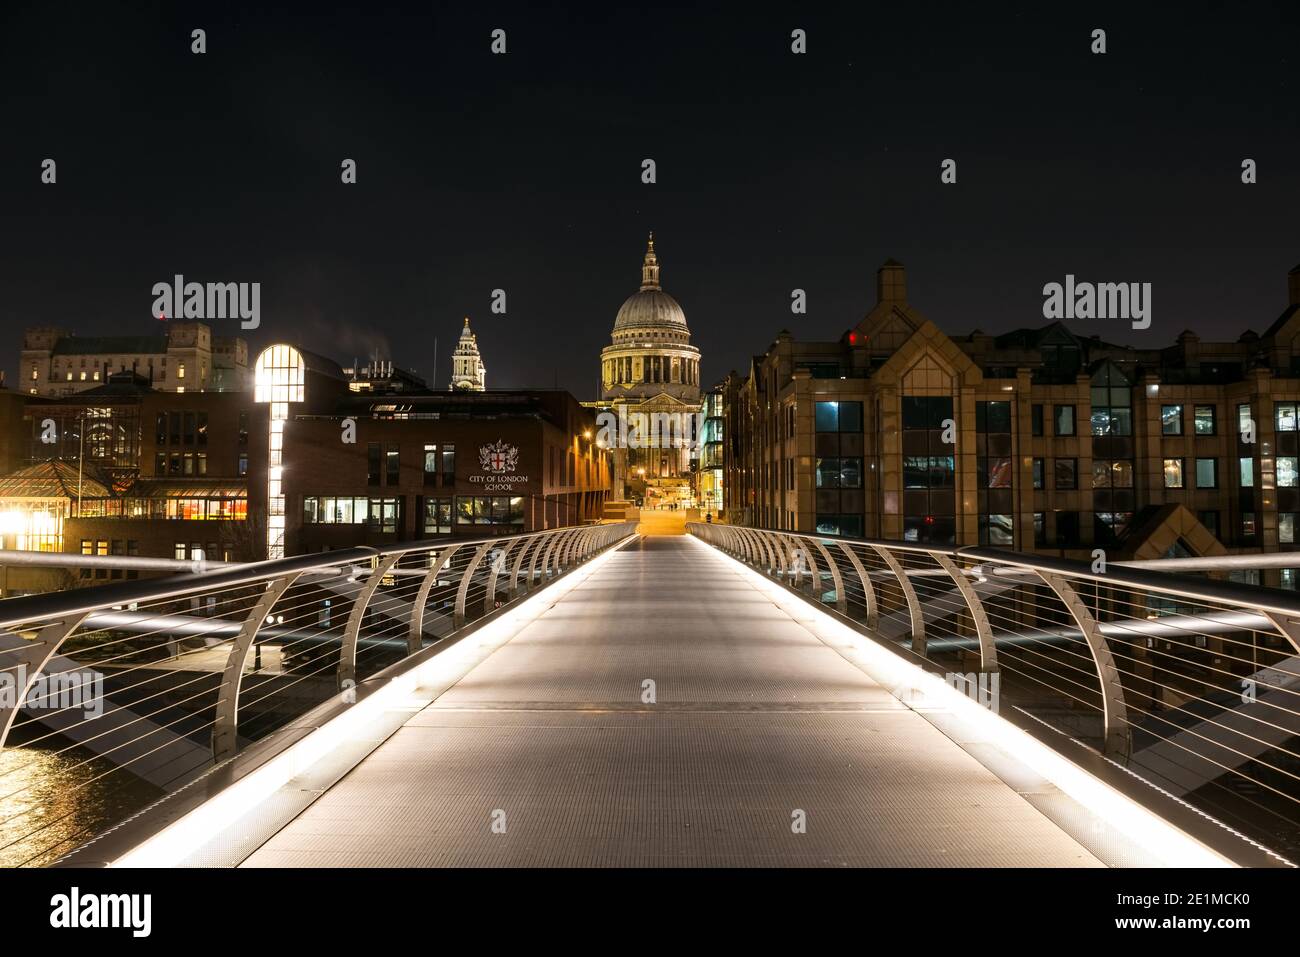 St Paul's cathedral from the Millenium Bridge at night, London, England Stock Photo